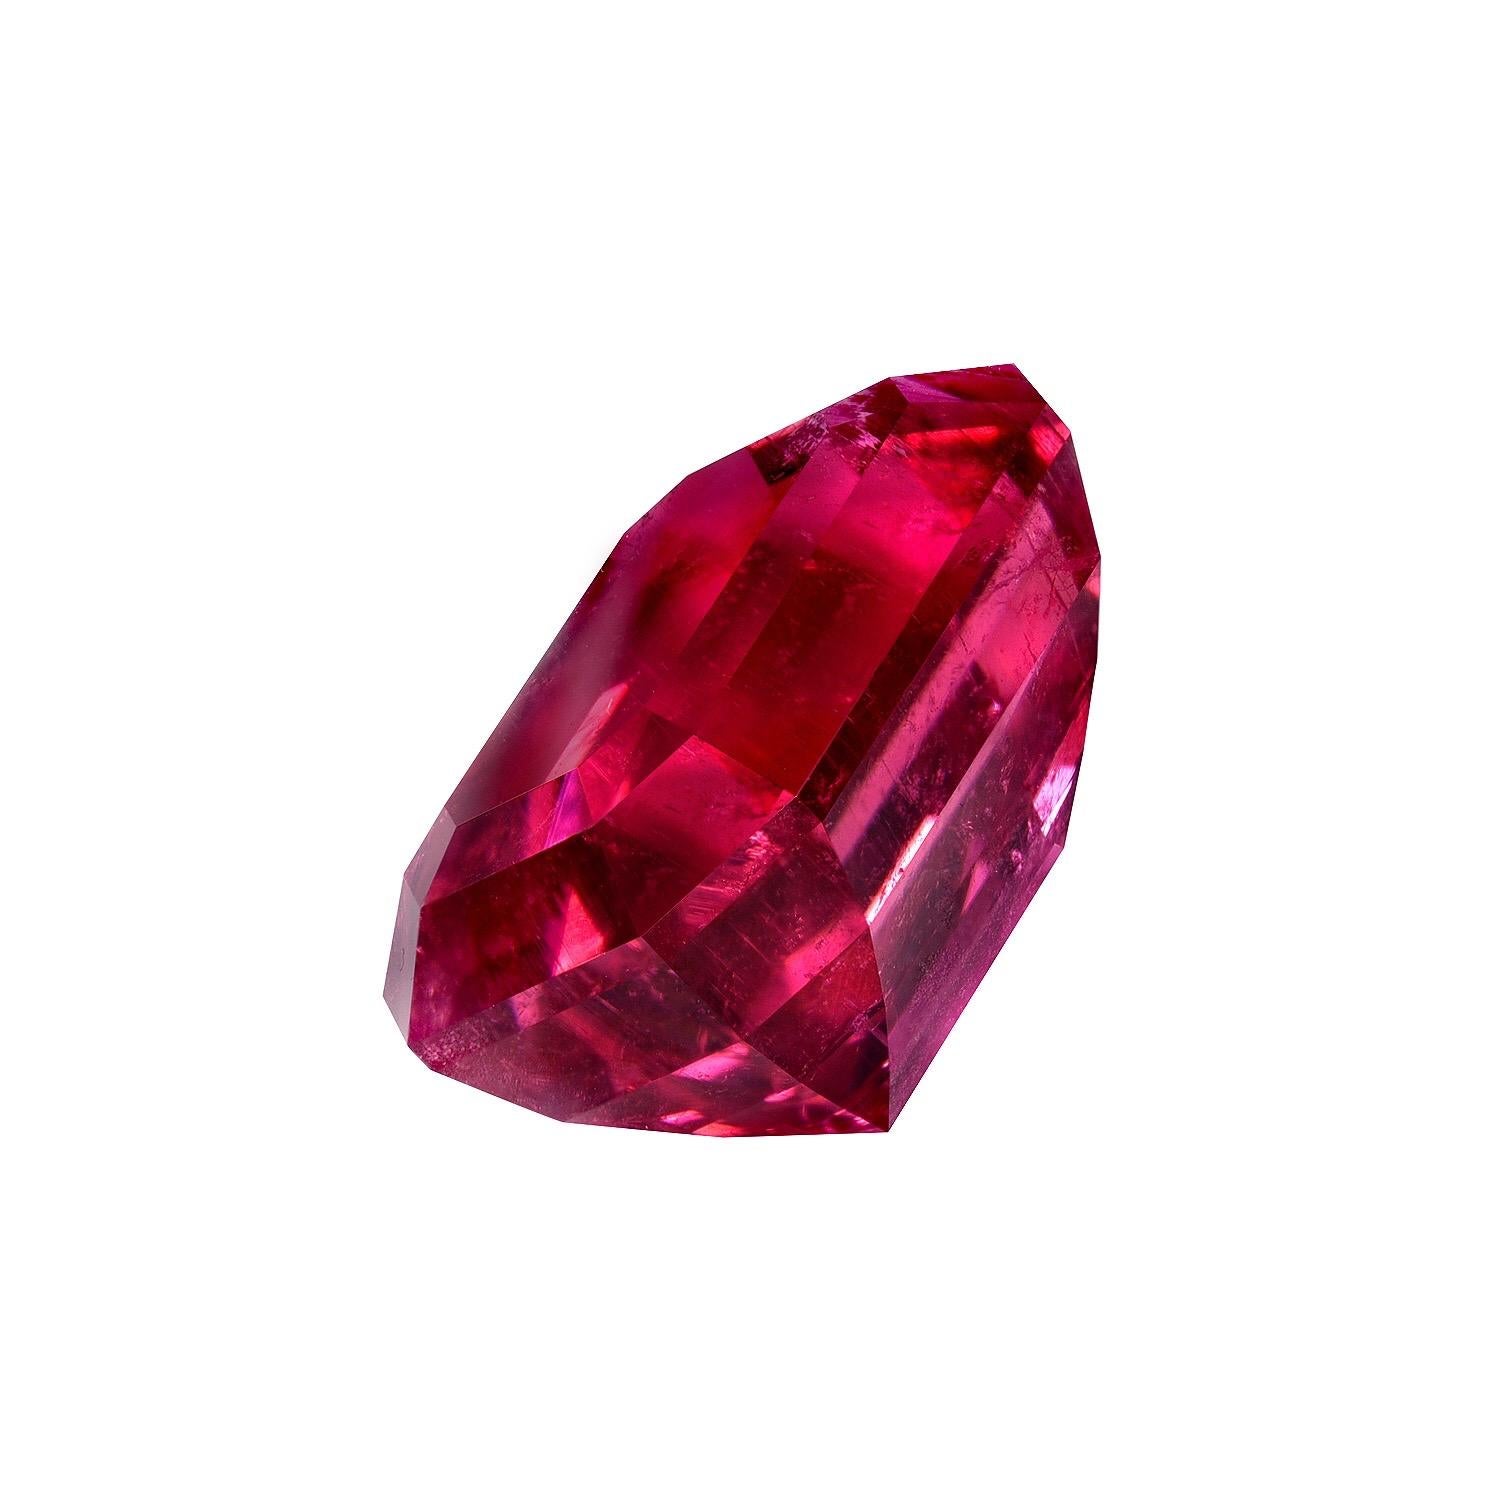 Remarkable 17.26 Rubelite Tourmaline emerald-cut gem, offered loose to a gemstone lover.
Returns are accepted and paid by us within 7 days of delivery.
All images are magnified to provide you with closer detail. 
We offer supreme custom jewelry work